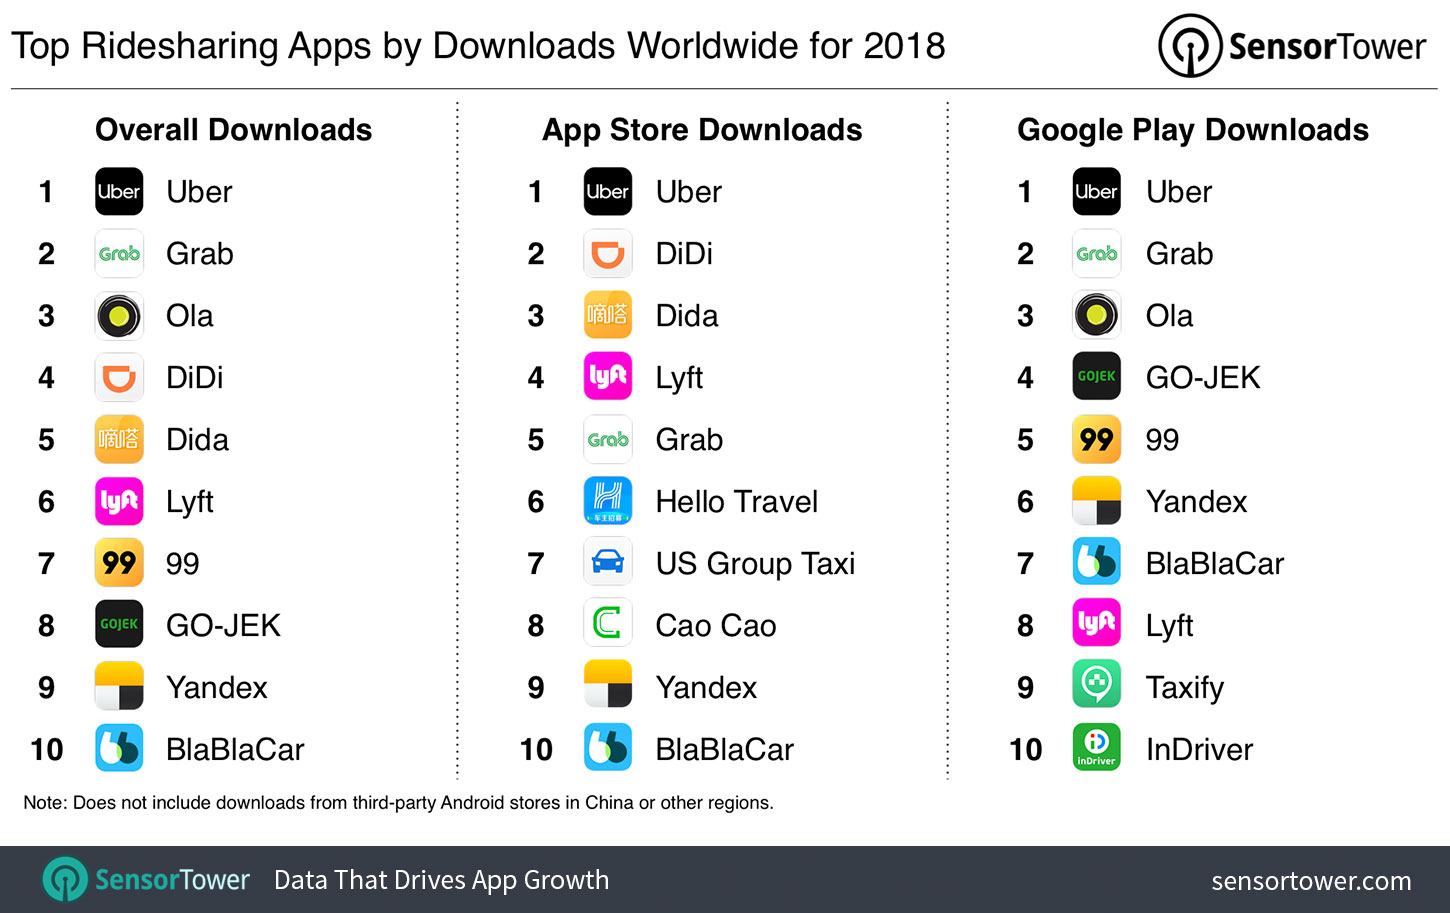 Top Ridesharing Apps Worldwide for 2018